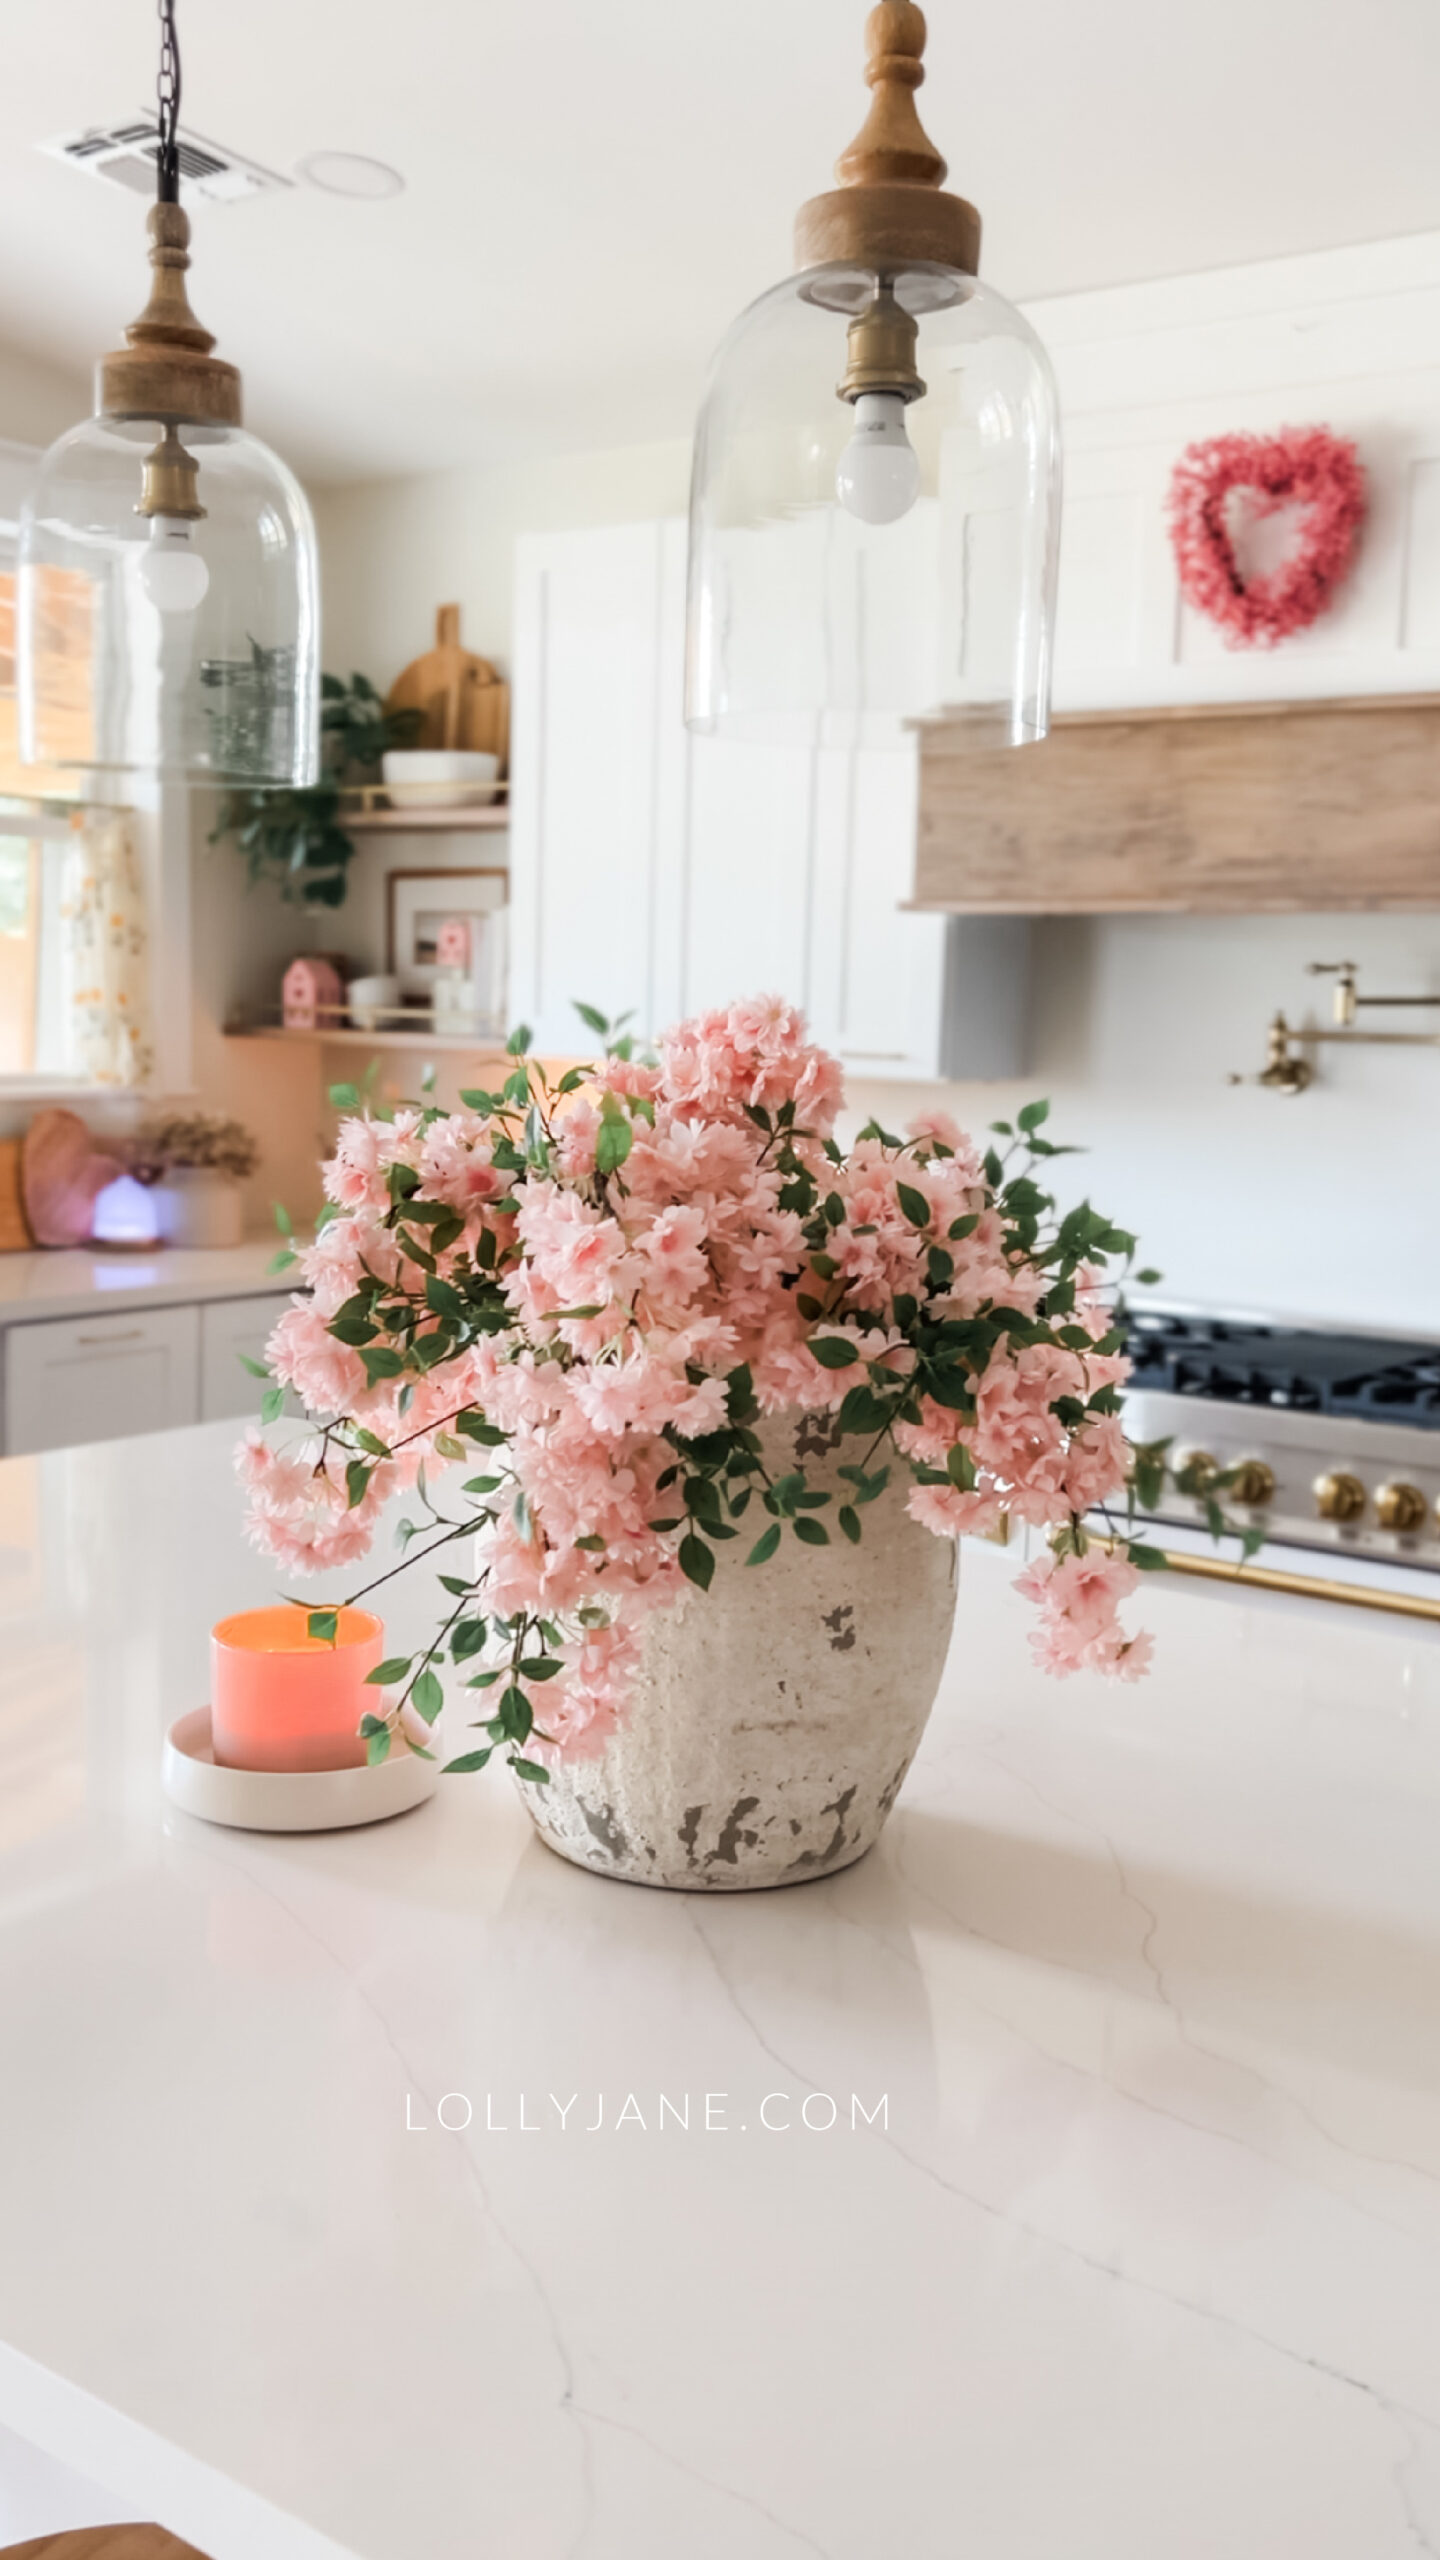 Learn the art of arranging a stunning spring flower arrangement with just a few simple steps! Start by selecting a mix of vibrant spring blooms, such as tulips, daffodils, and hyacinths. Then, layer them in a vase, varying heights and textures for a dynamic and visually appealing display that brings the beauty of the season indoors.